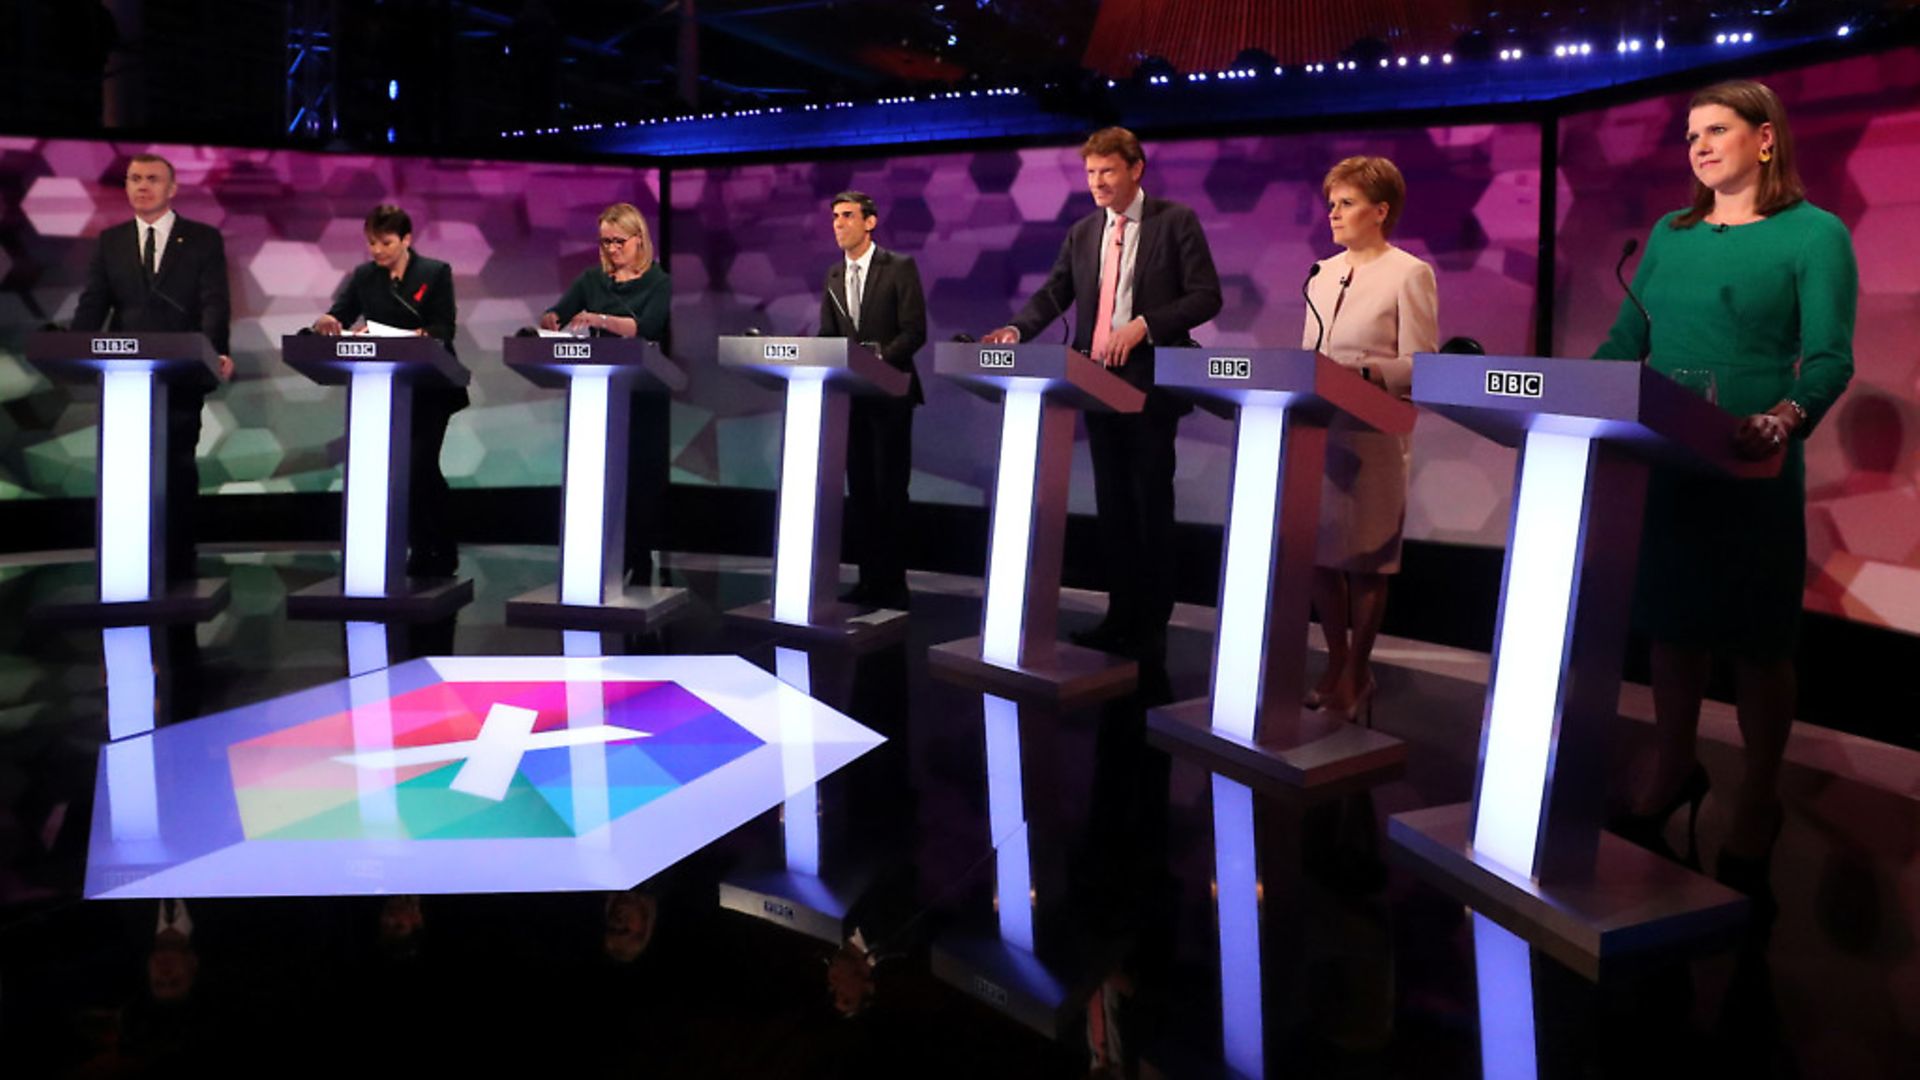 Representatives from seven of the major parties in a TV debate. Photograph: Hannah McKay/PA Wire - Credit: PA